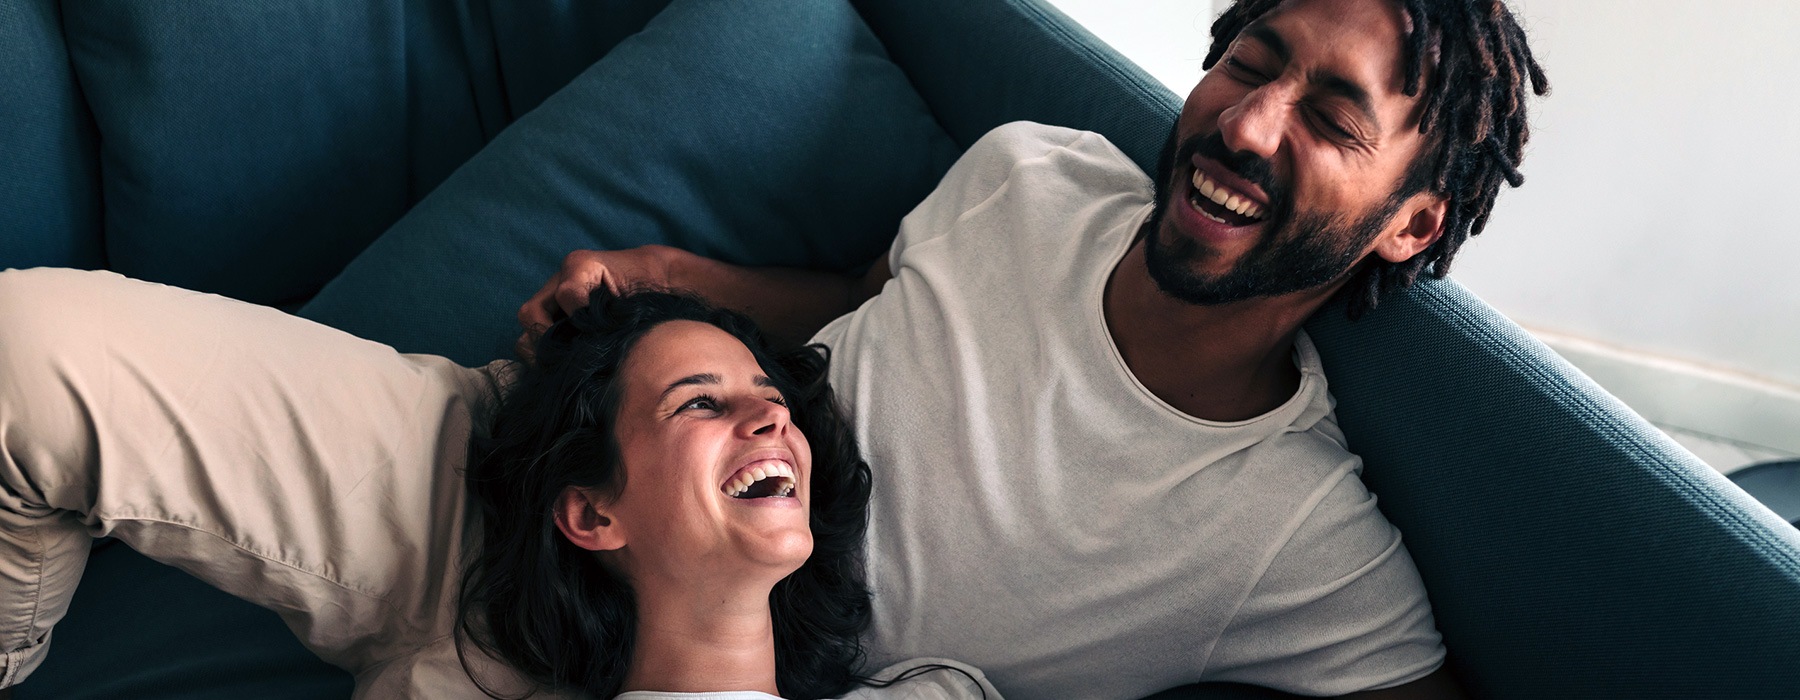 lifestyle image of a couple laughing on a couch